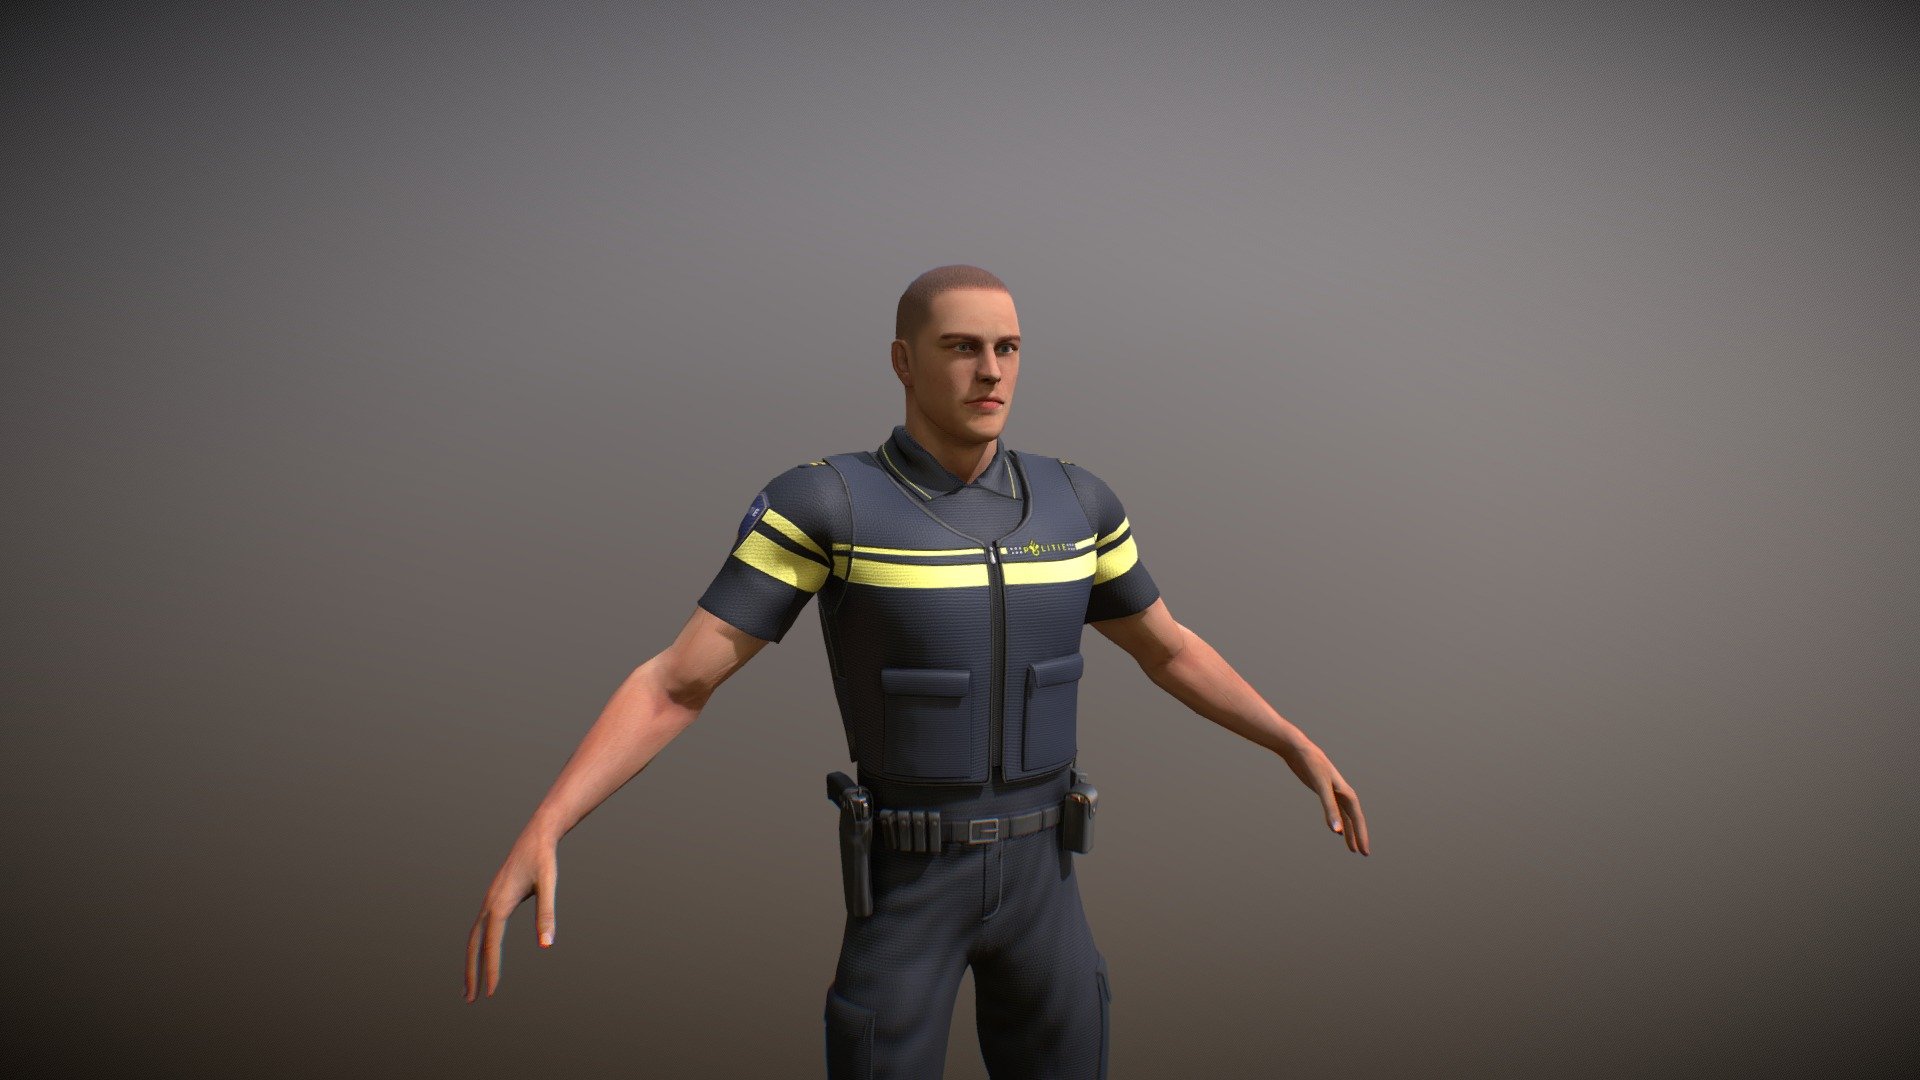 For a custom dutch police VR simulation project, we made a custom dutch police officer model with realistic details and rigged. 

The related VR project is as experimental to learn diffirent scenario's as a police officer and how it is like being in a world where everything can happen just as in real life. This model and project affiliated content will not be downloadable or available to the public it was rigged for the Unreal Engine 4.

This project is not affiliated to the original author AKA Politie Nederland and its subsidaries 3d model